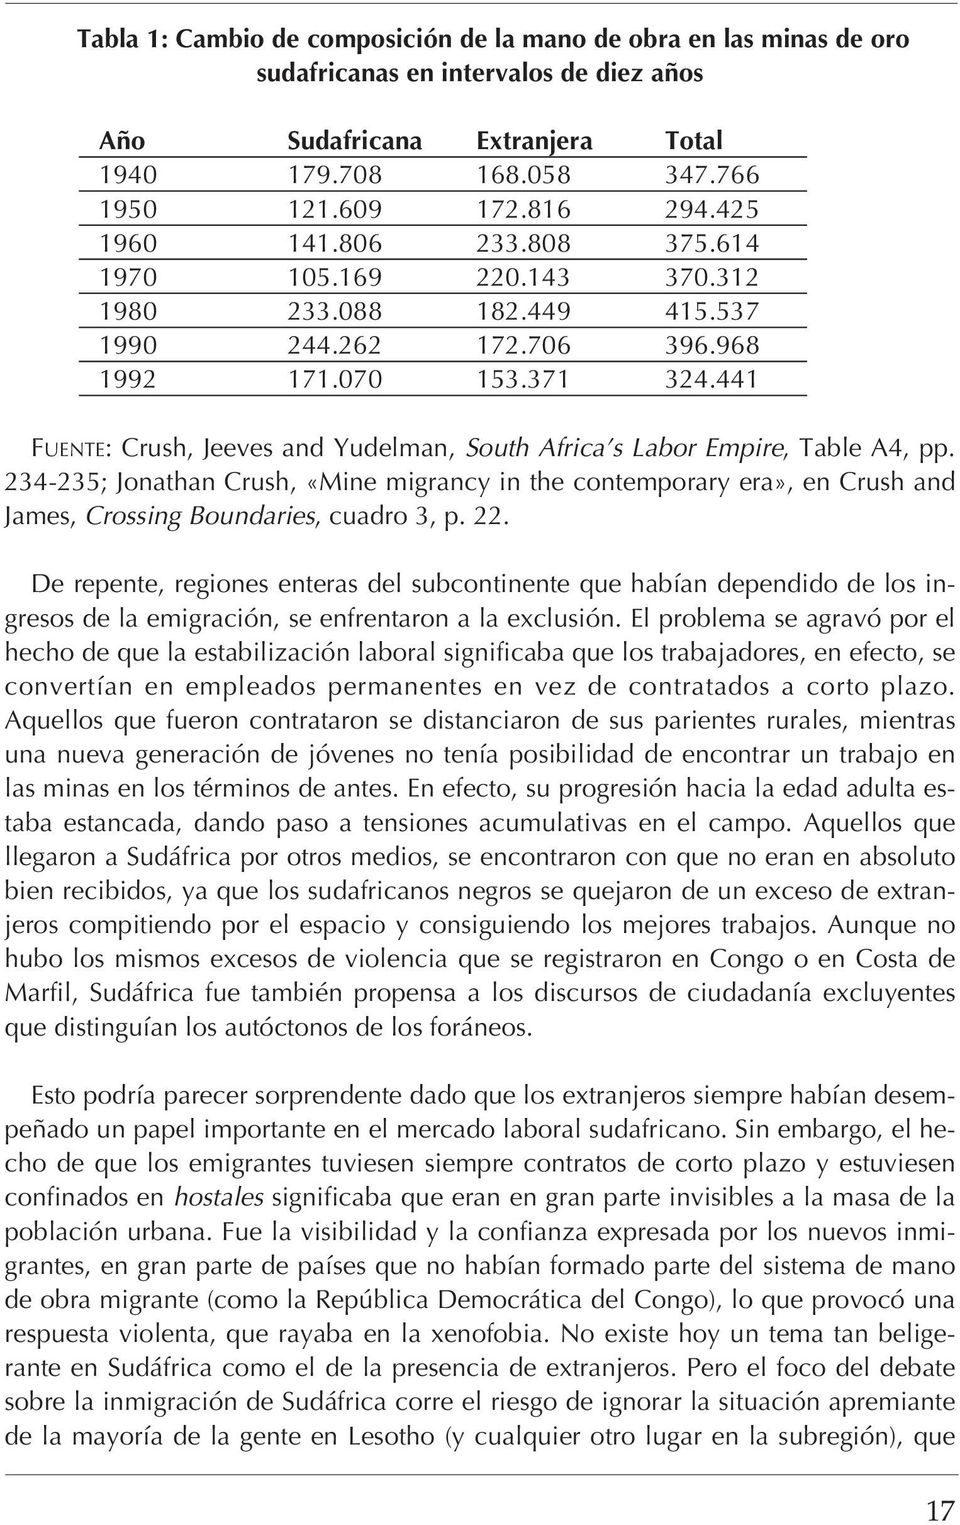 441 FUENTE: Crush, Jeeves and Yudelman, South Africa s Labor Empire, Table A4, pp.